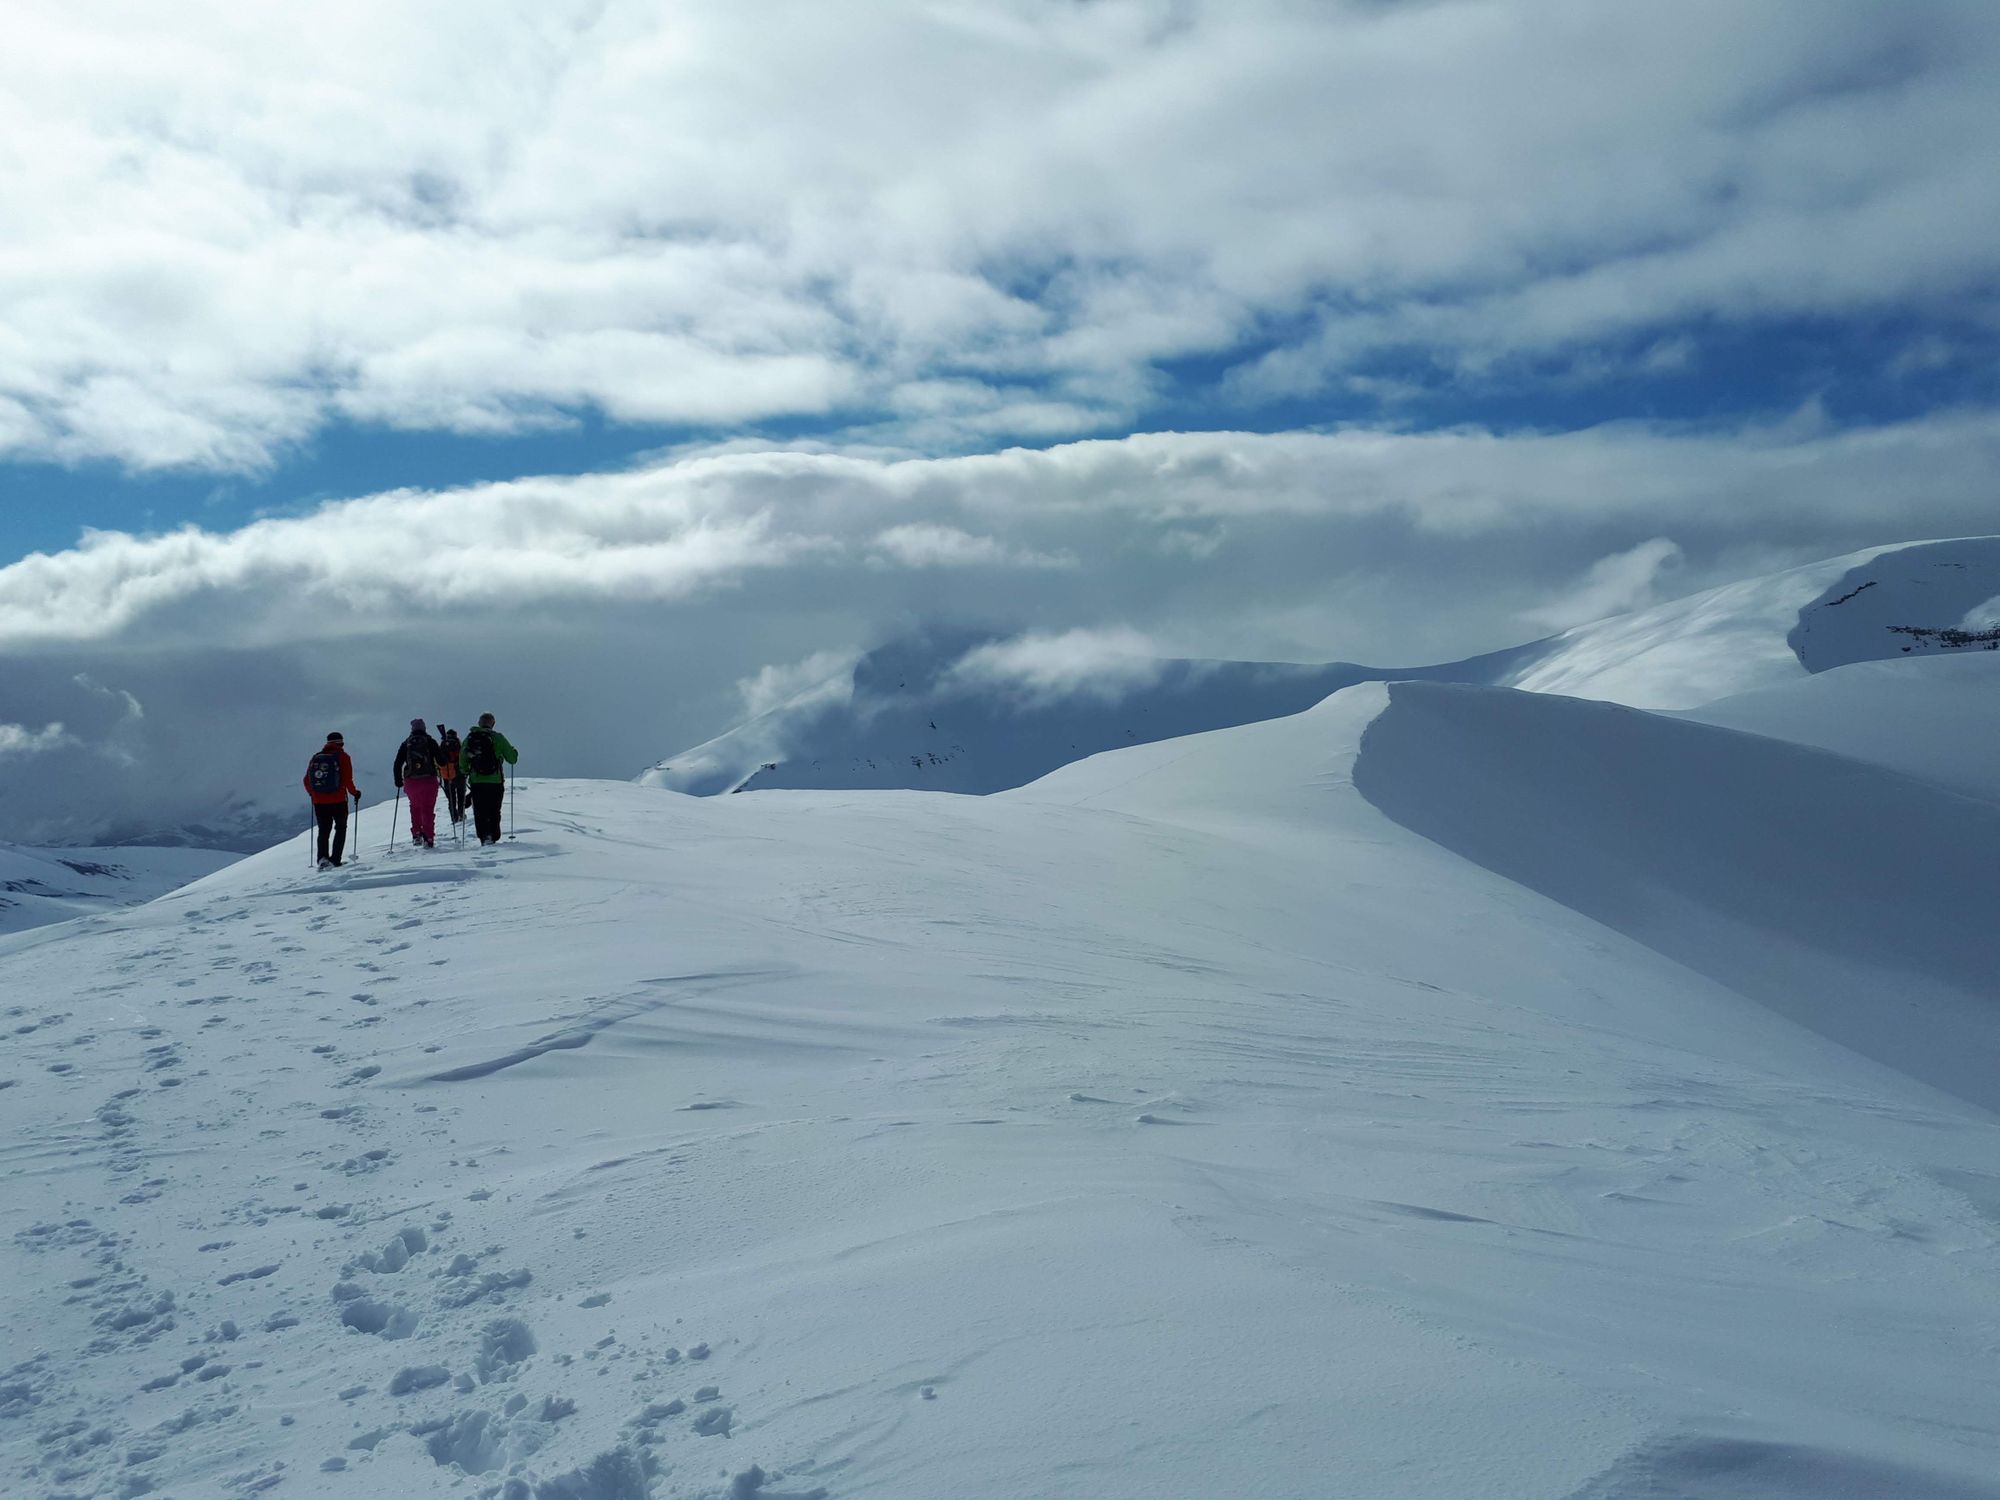 Trekking in the mountains surrounding Longyearbyen, led by an armed guide.